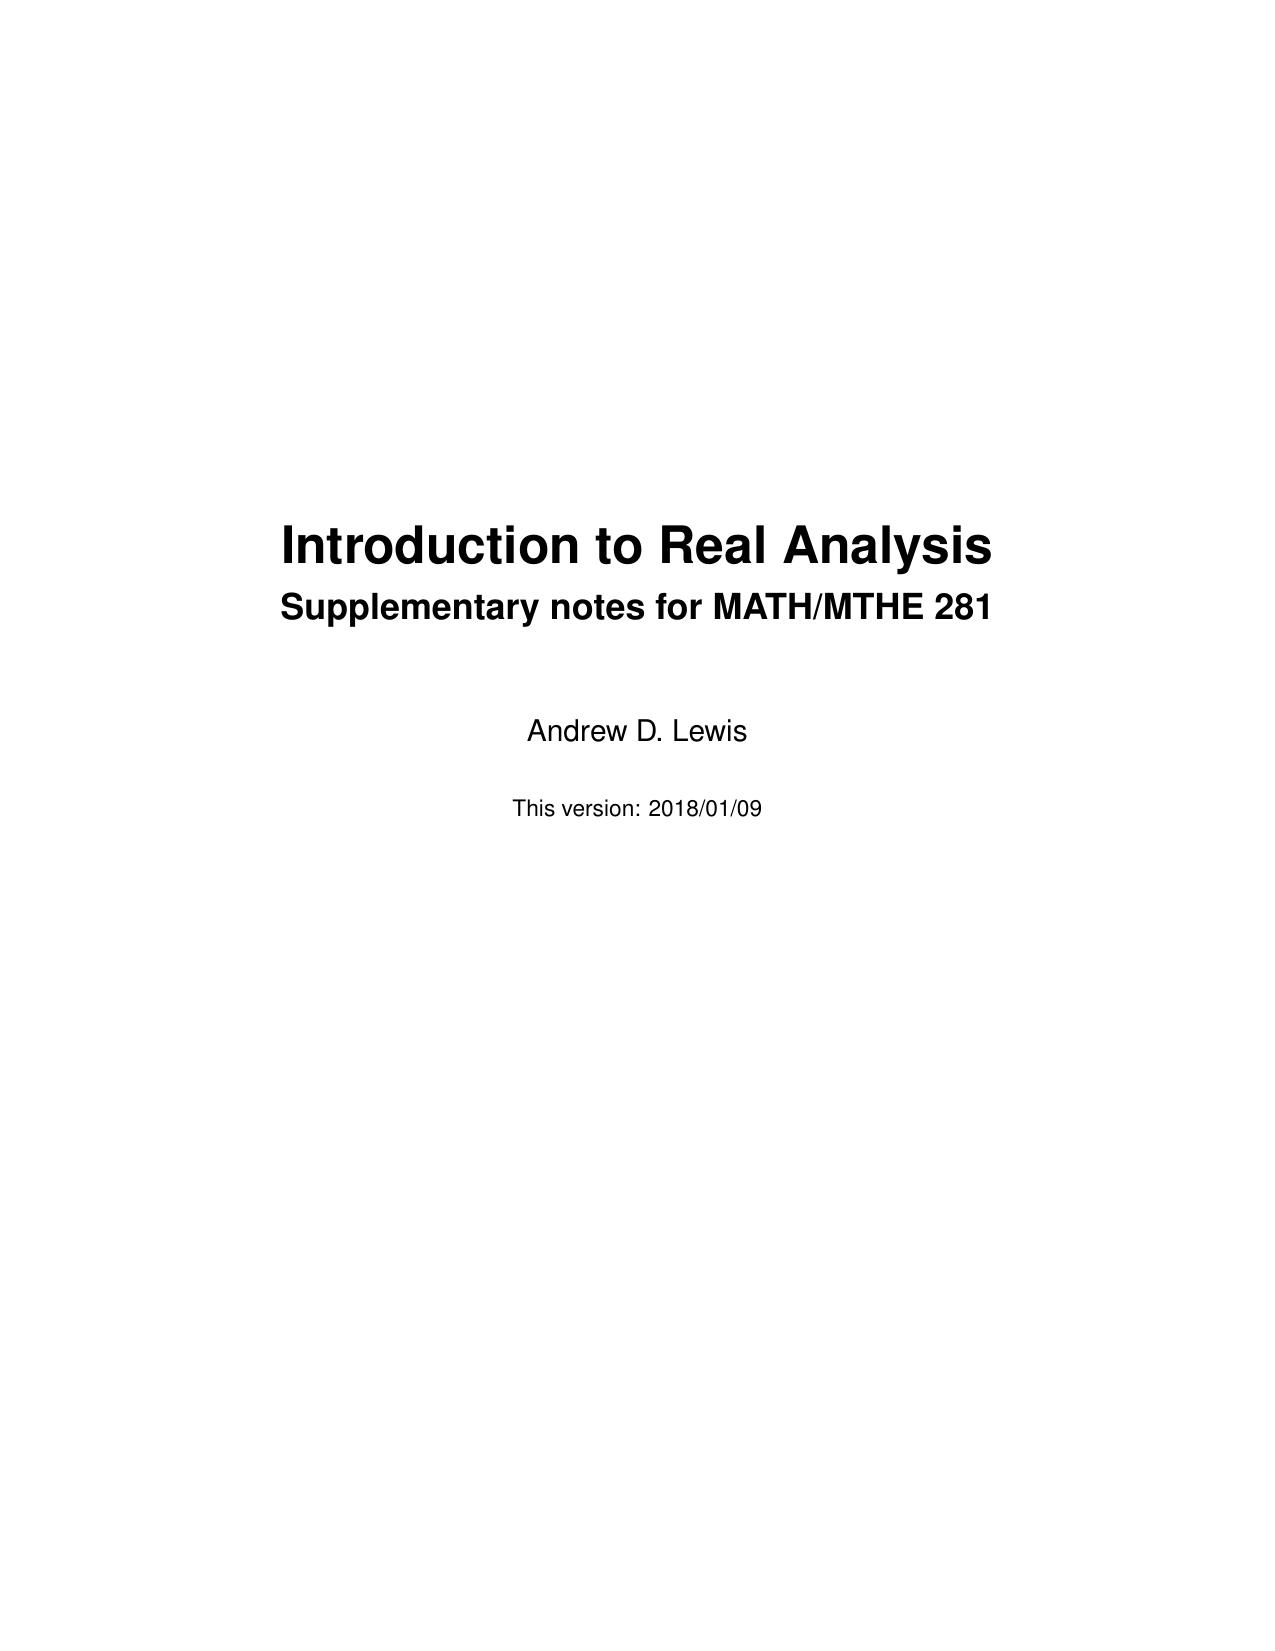 Introduction to Real Analysis 2018